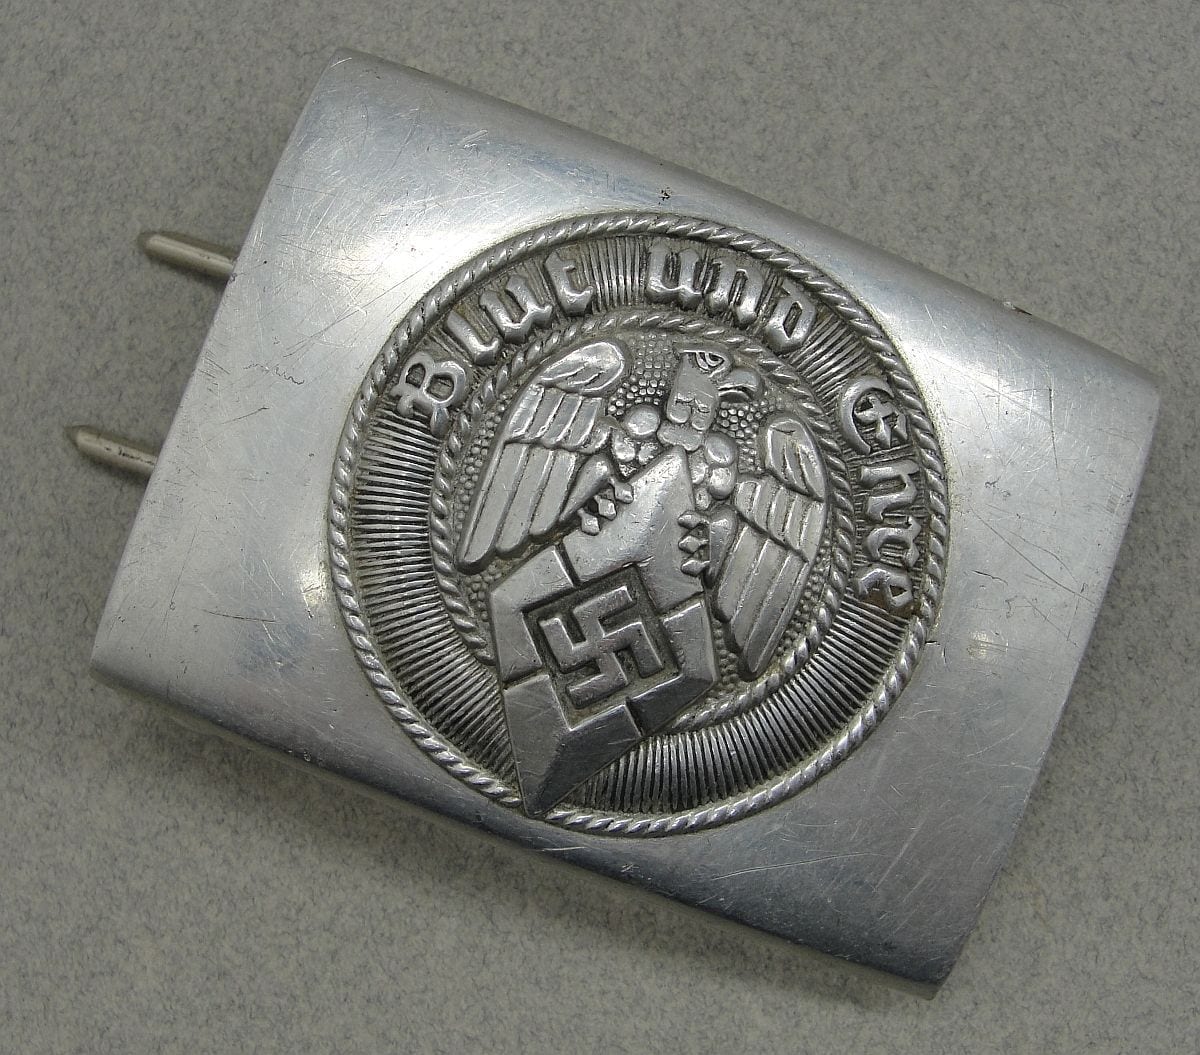 Hitler Youth Belt Buckle by "RZM M4/46"